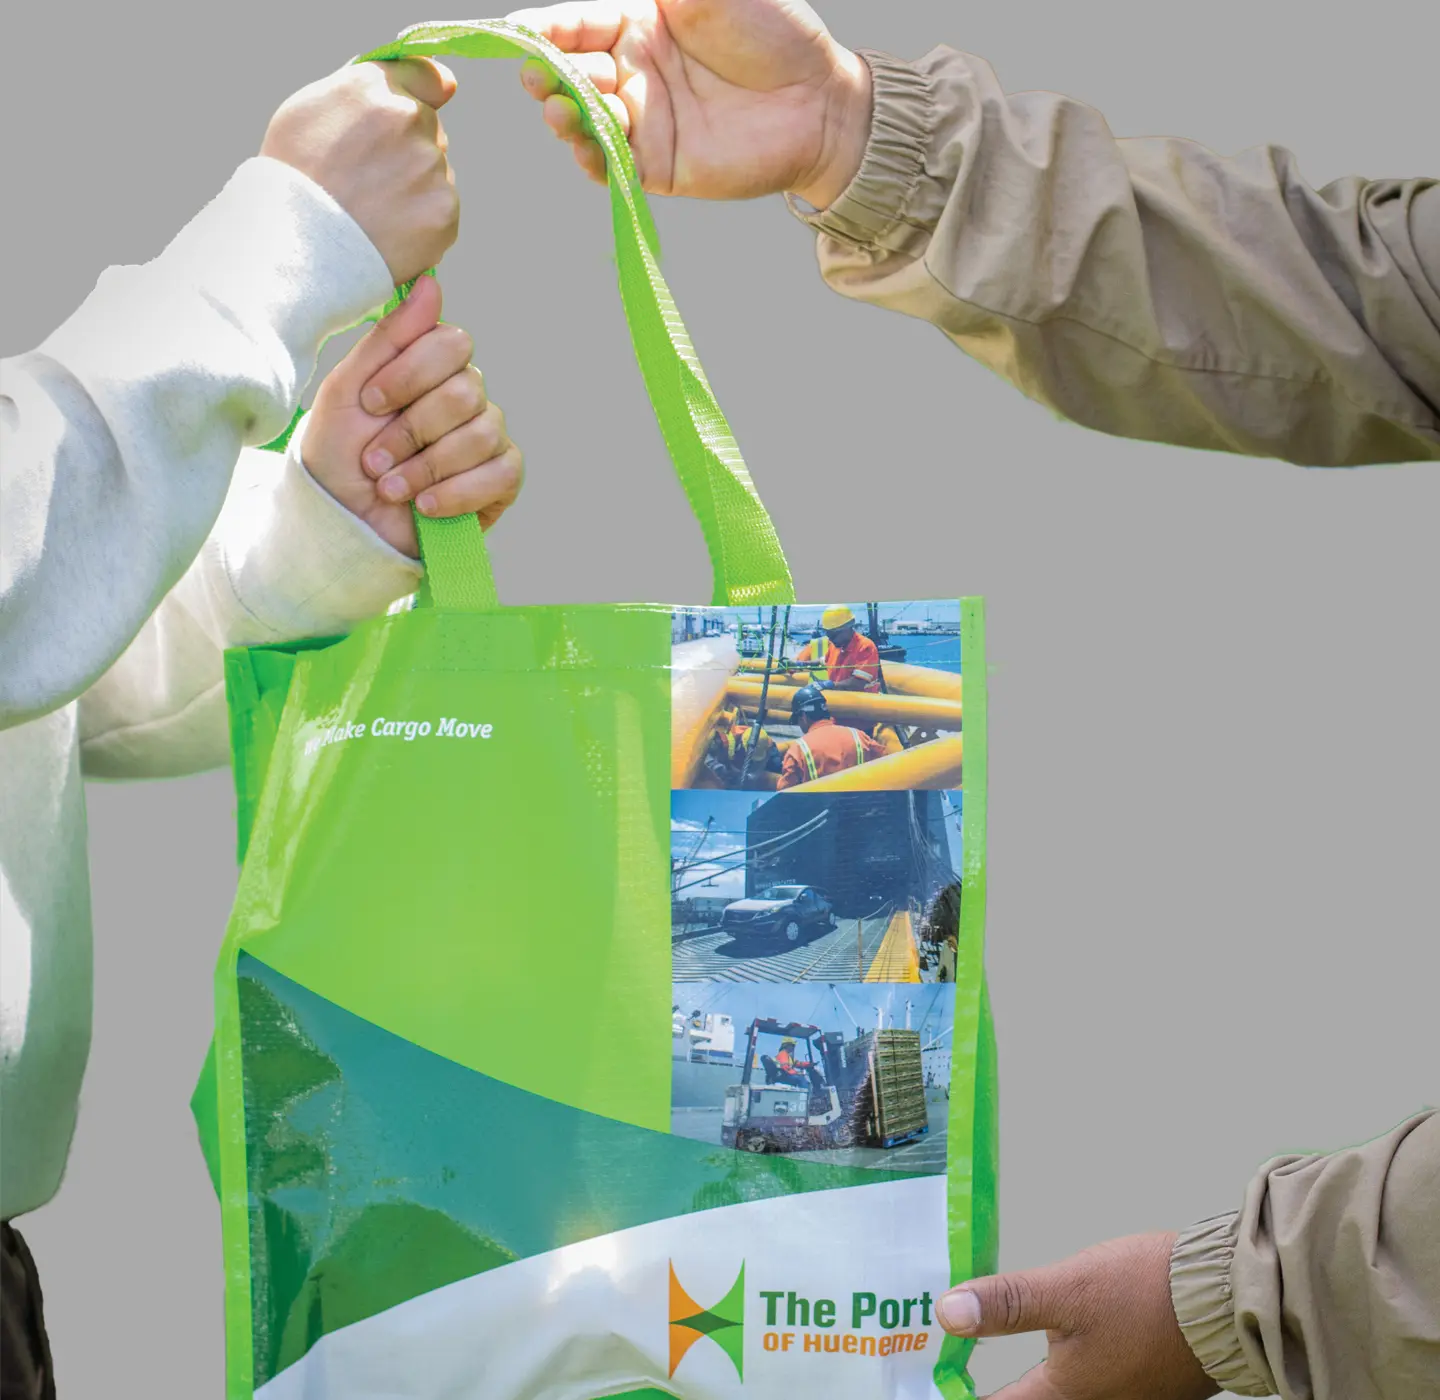 Two people holding a green and white tote bag adorned with "The Port of Hueneme" logo and various images of port activities, capturing the essence of community events.